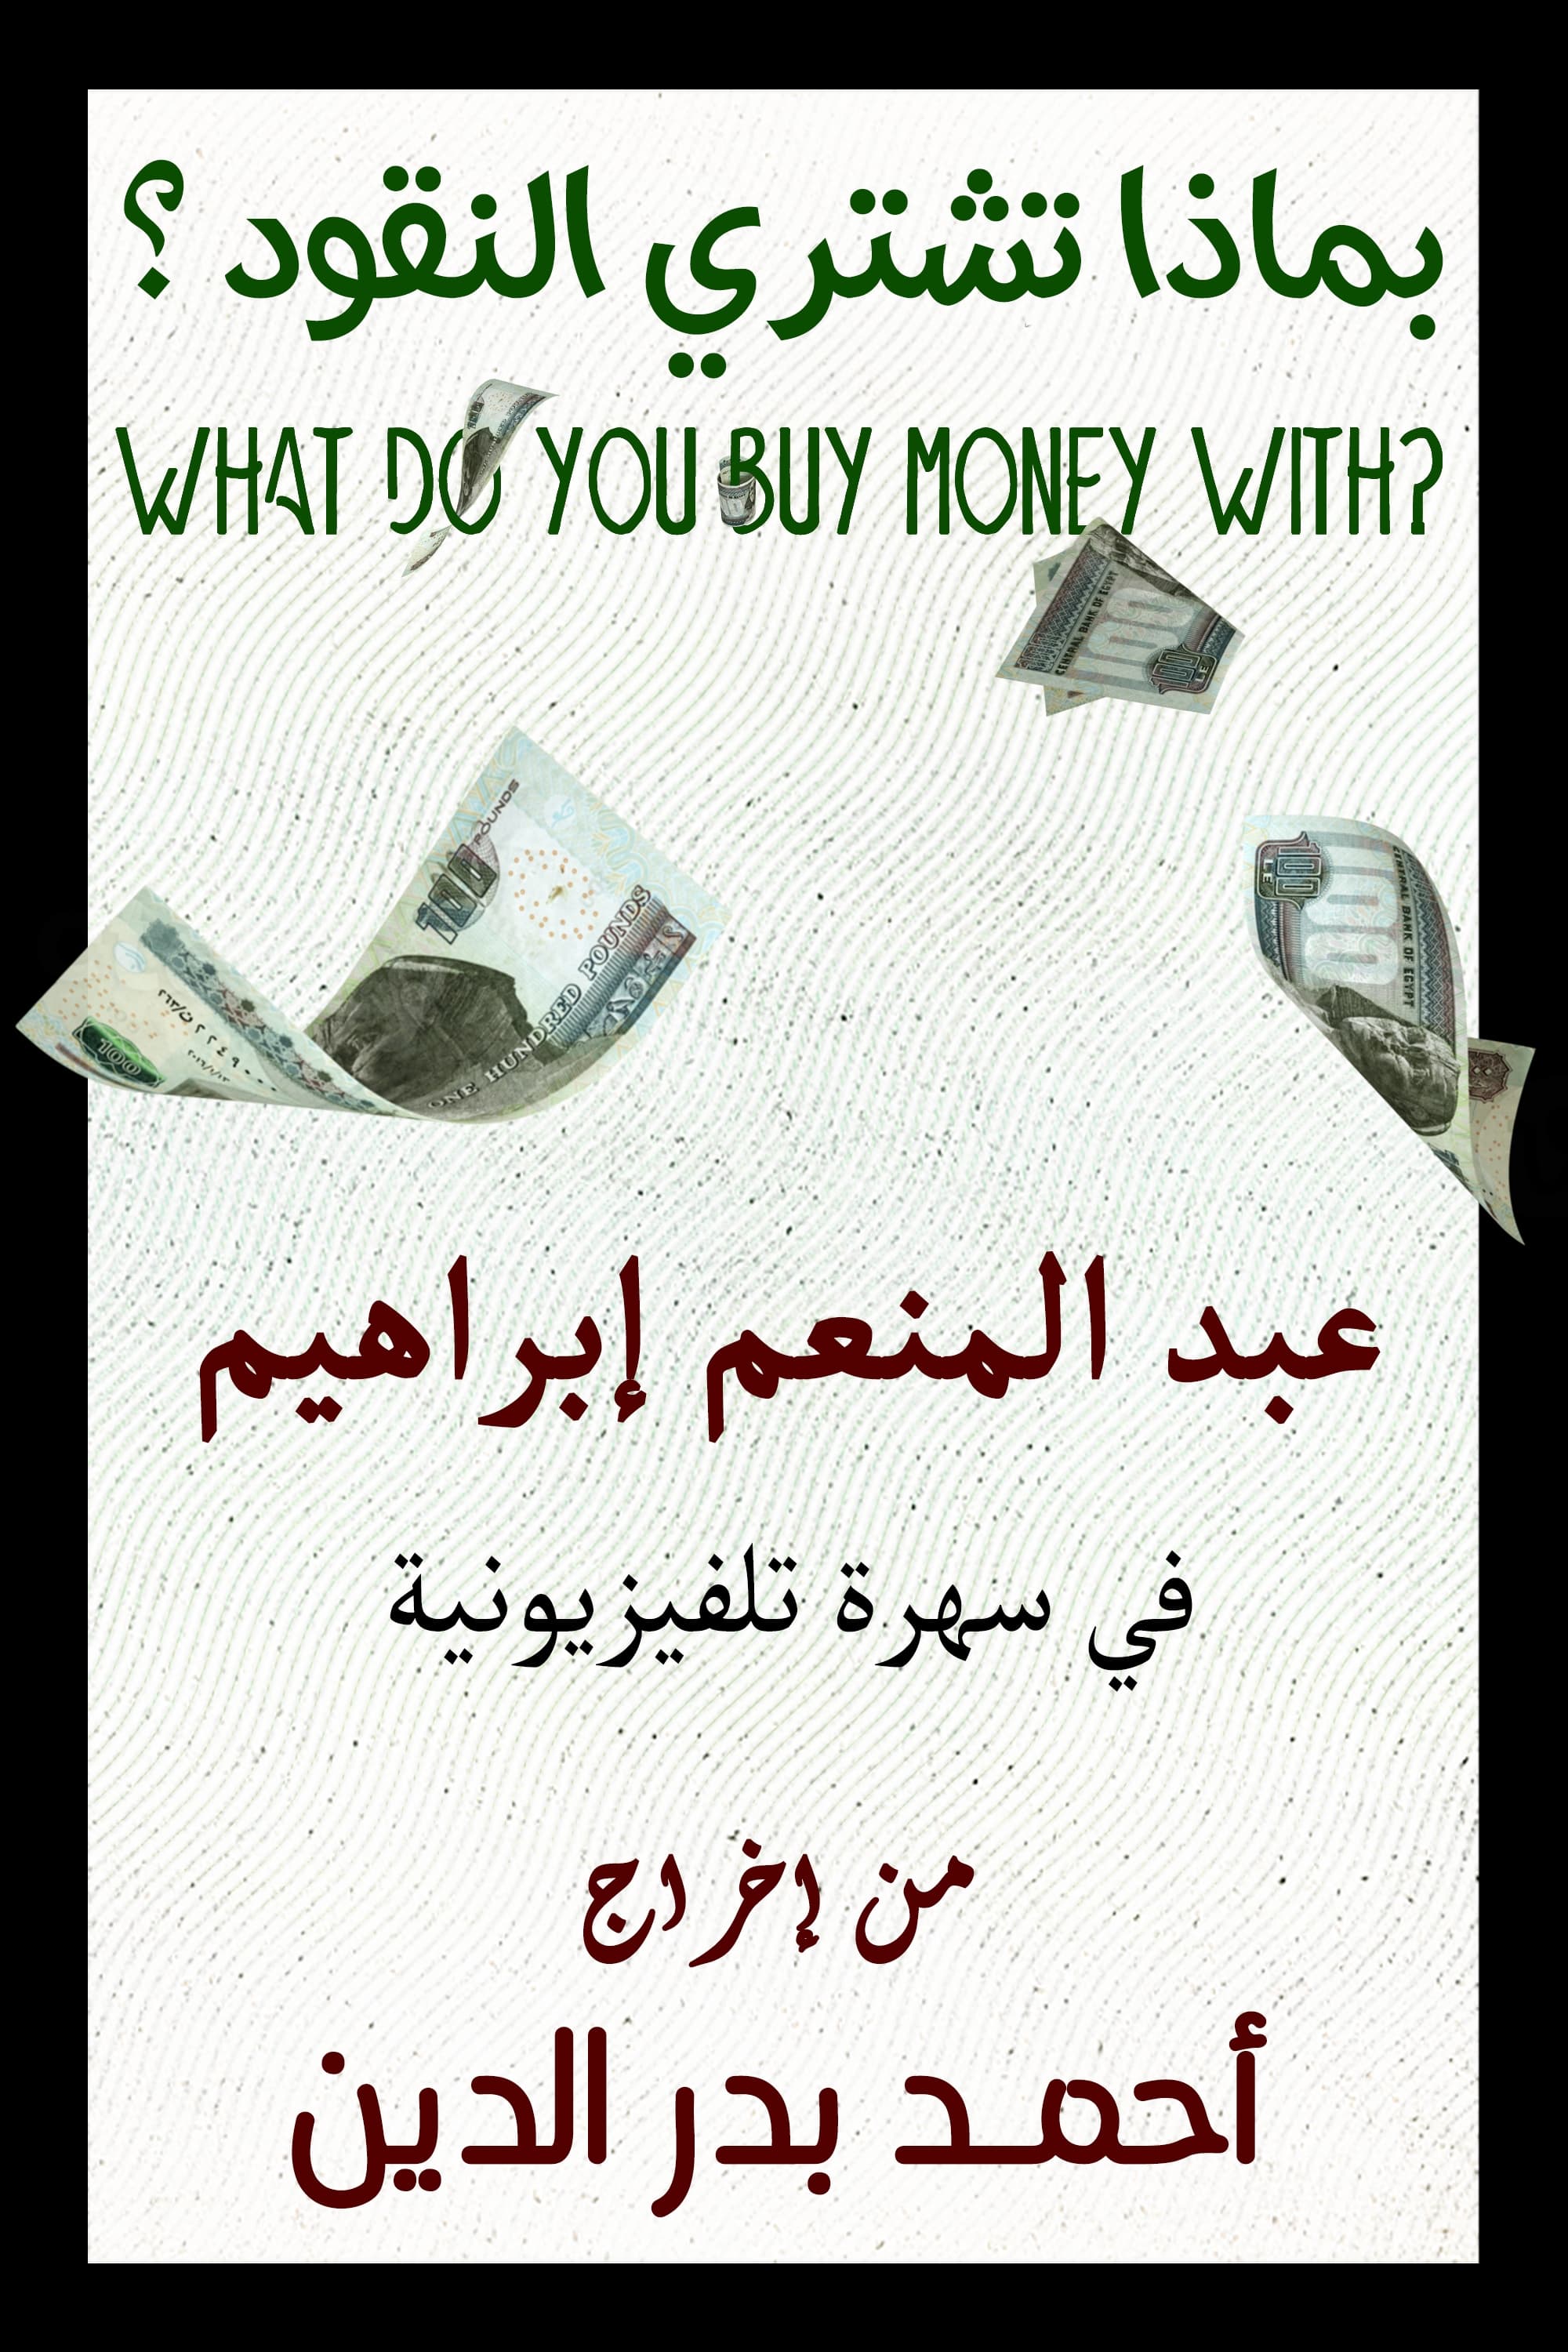 What do you buy money with?